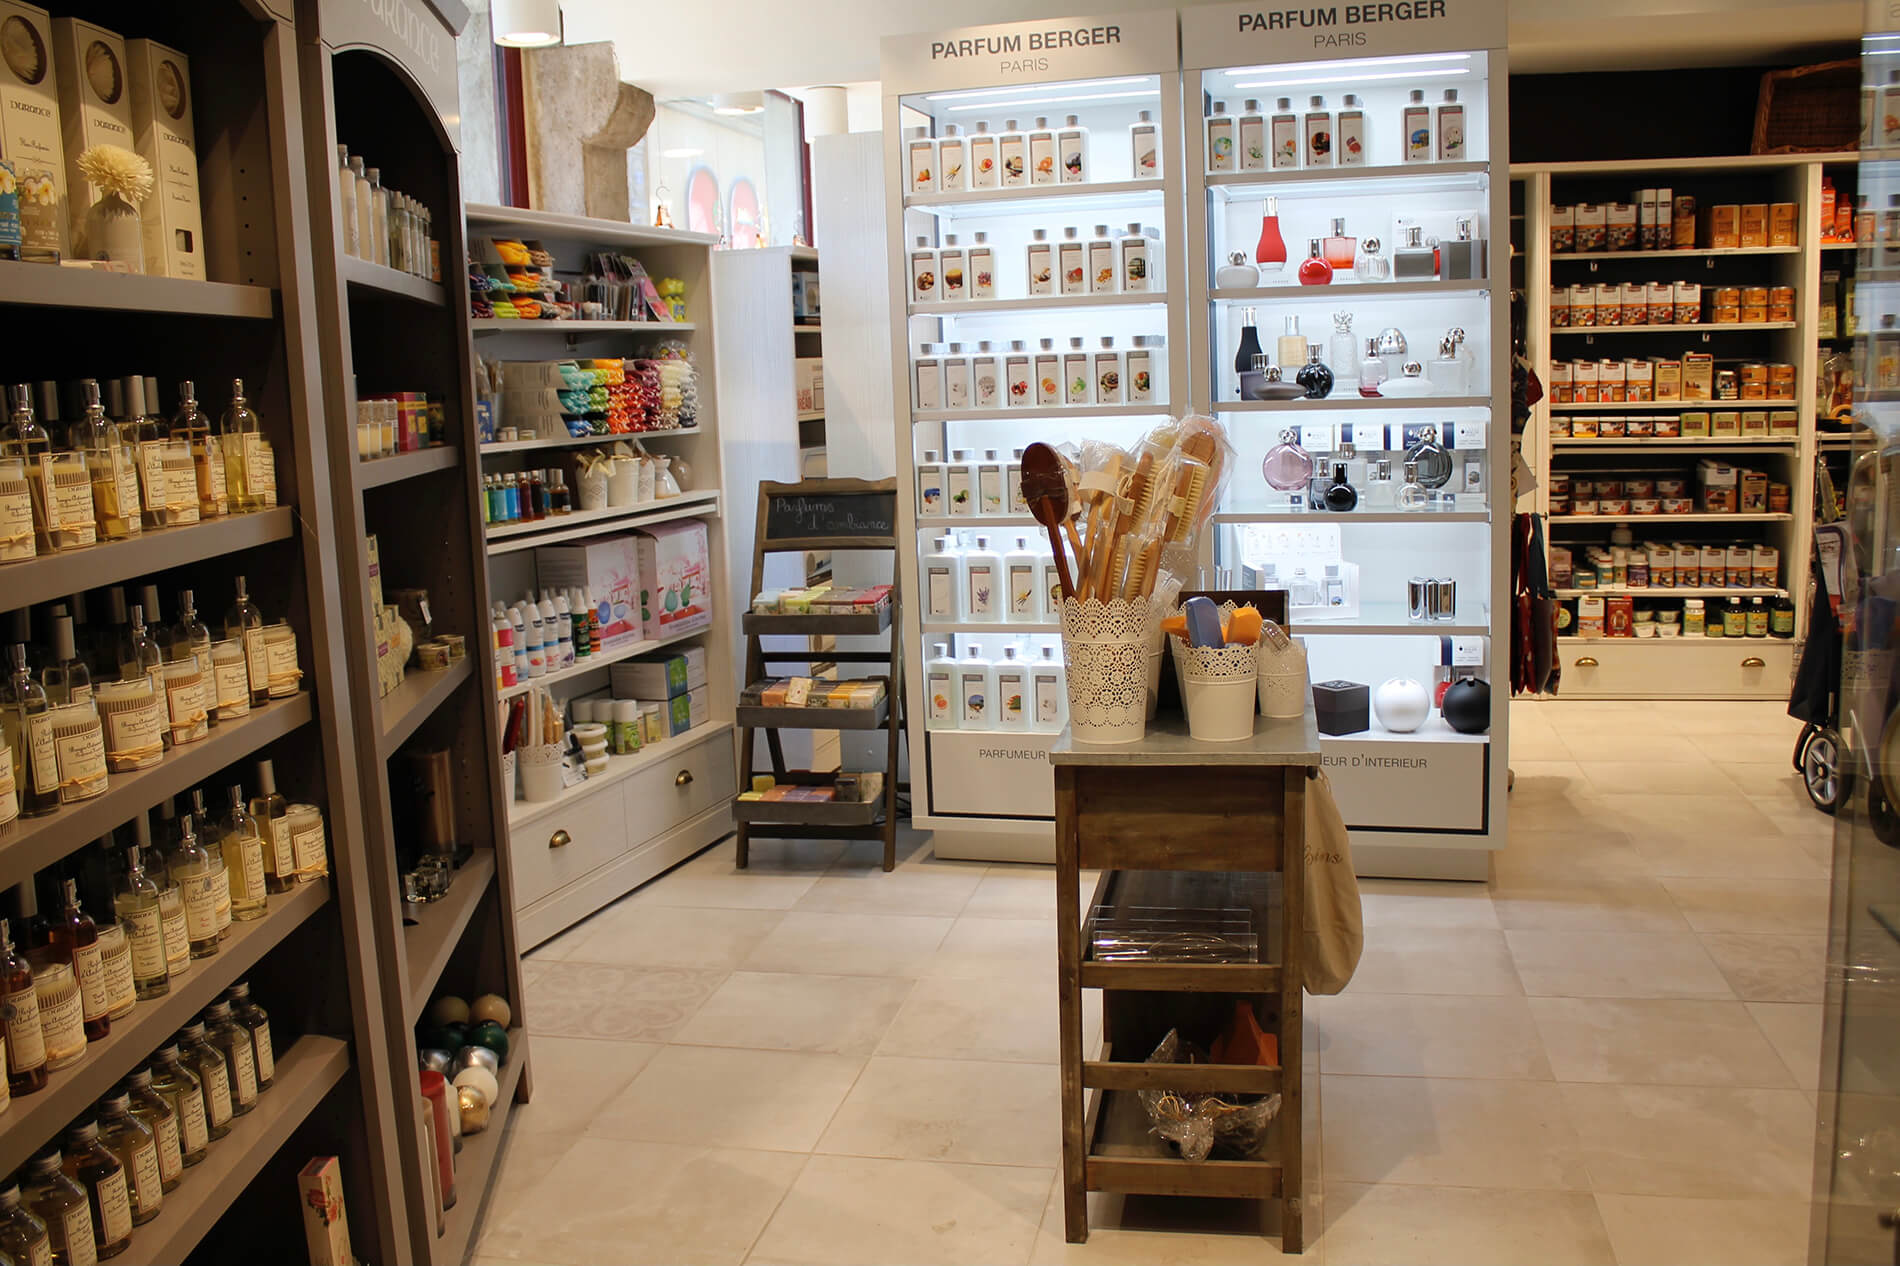 Drugstore Renovation - new interior layout with shelf space for 8,500 products, designed by Beatrice Leupold